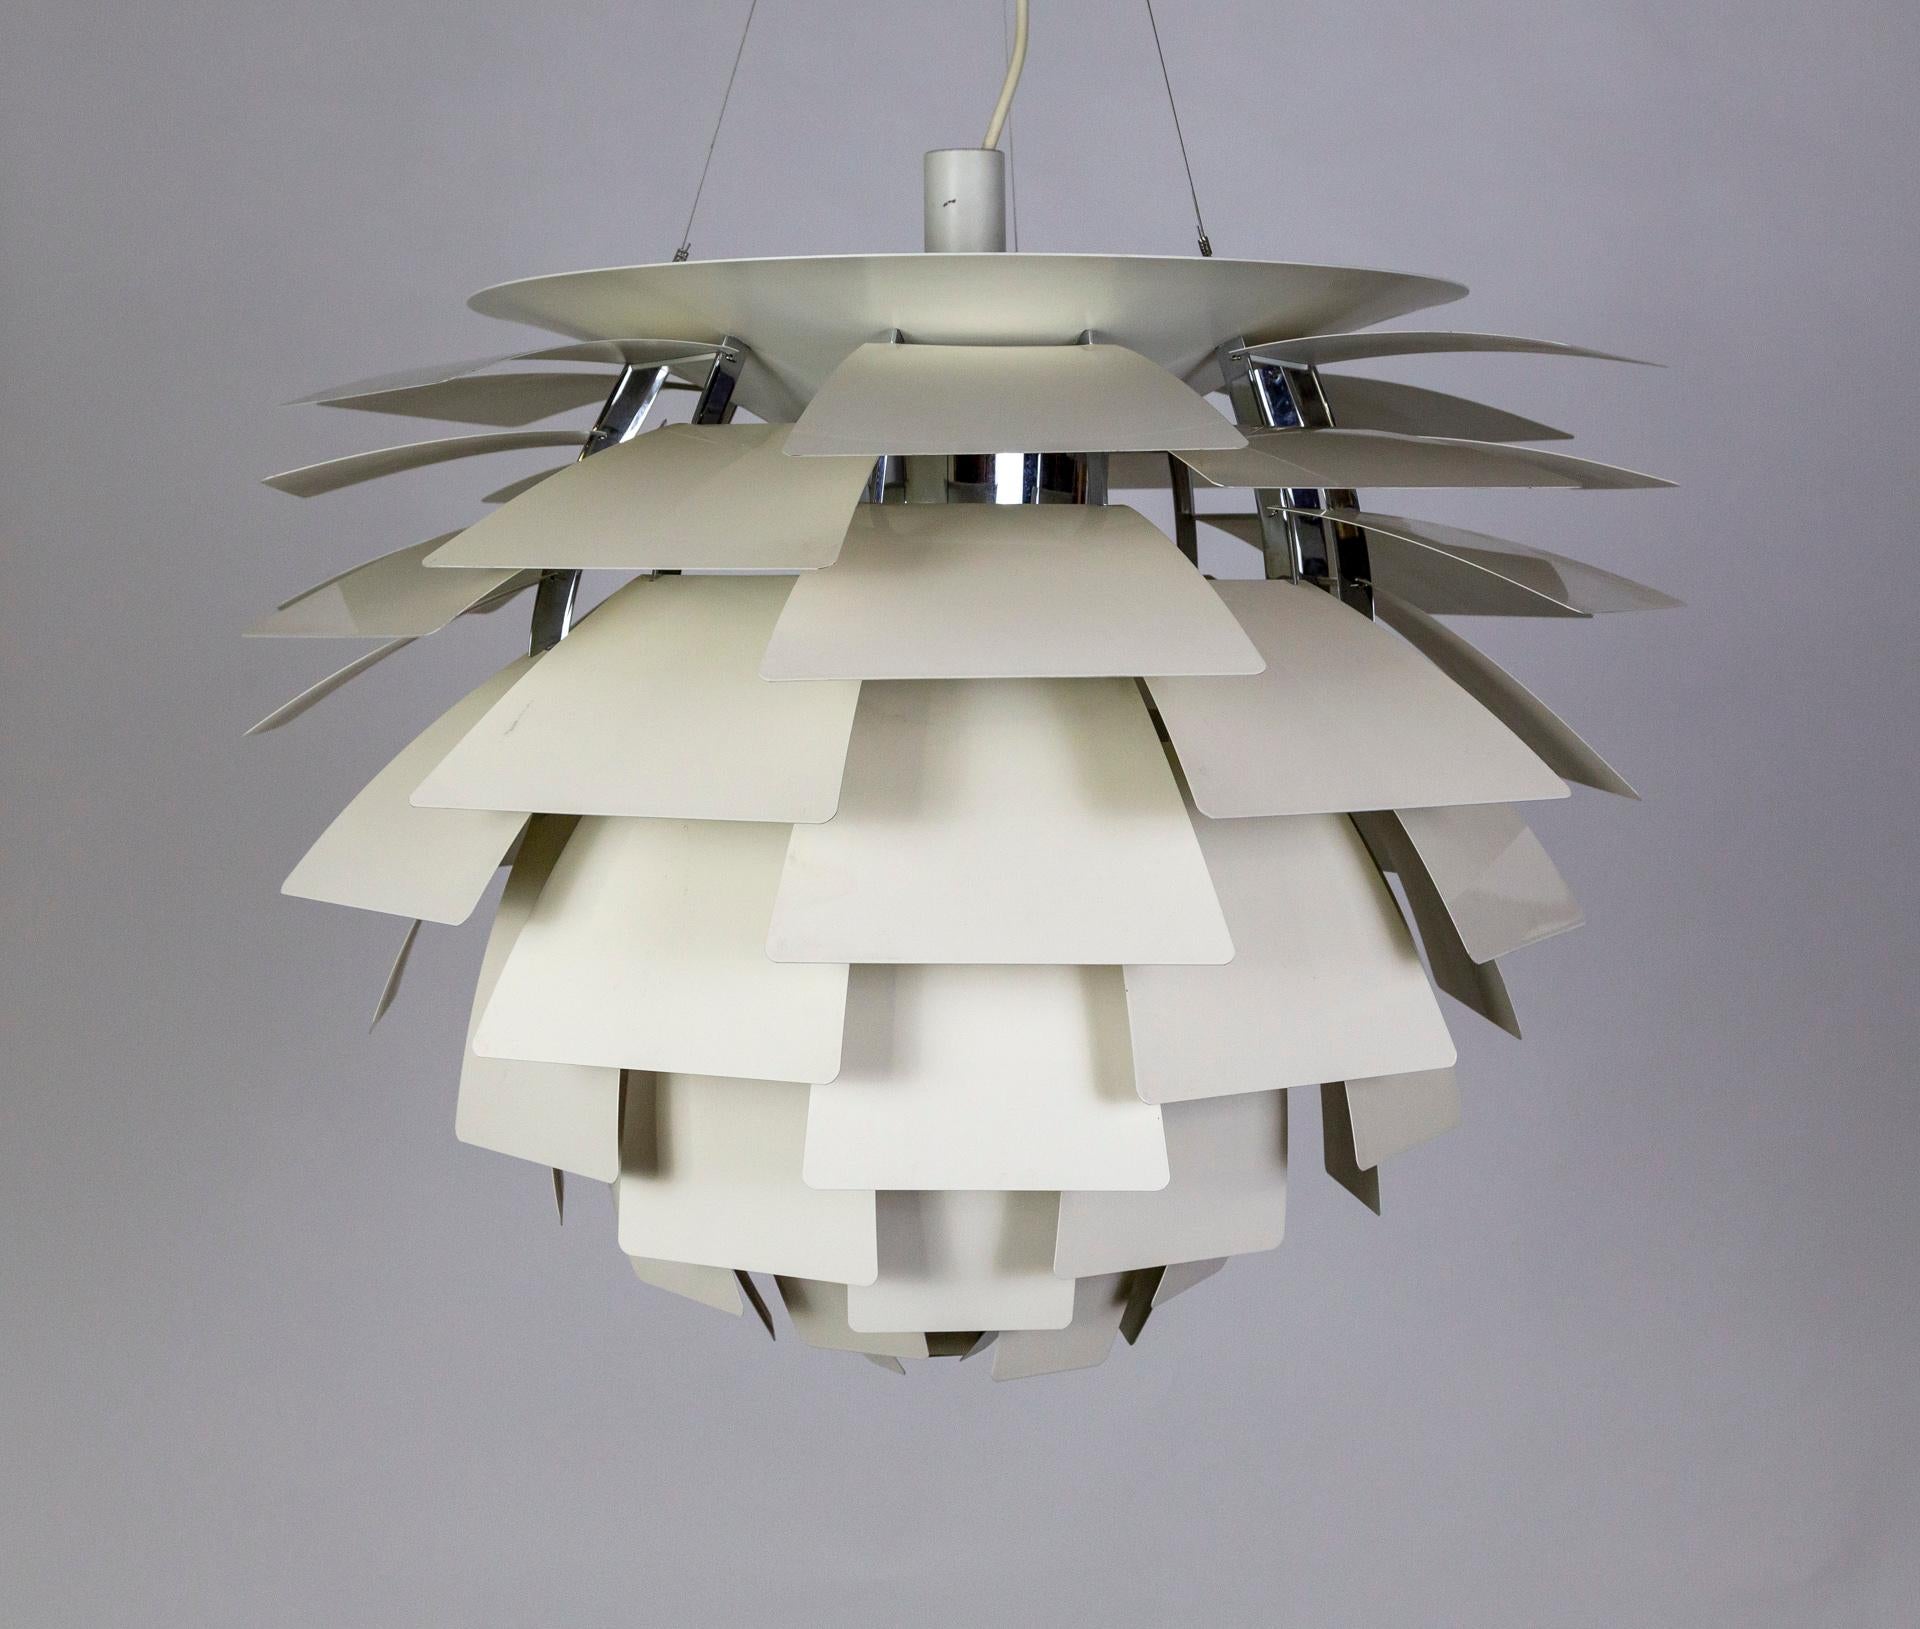 The PH Artichoke pendant light was designed in 1958 by Poul Henningsen in Copenhagen for Louis Poulson. Since then it has become an iconic, midcentury design and is continuously produced. The lamp consists of 72 handmade, white, lacquered aluminum